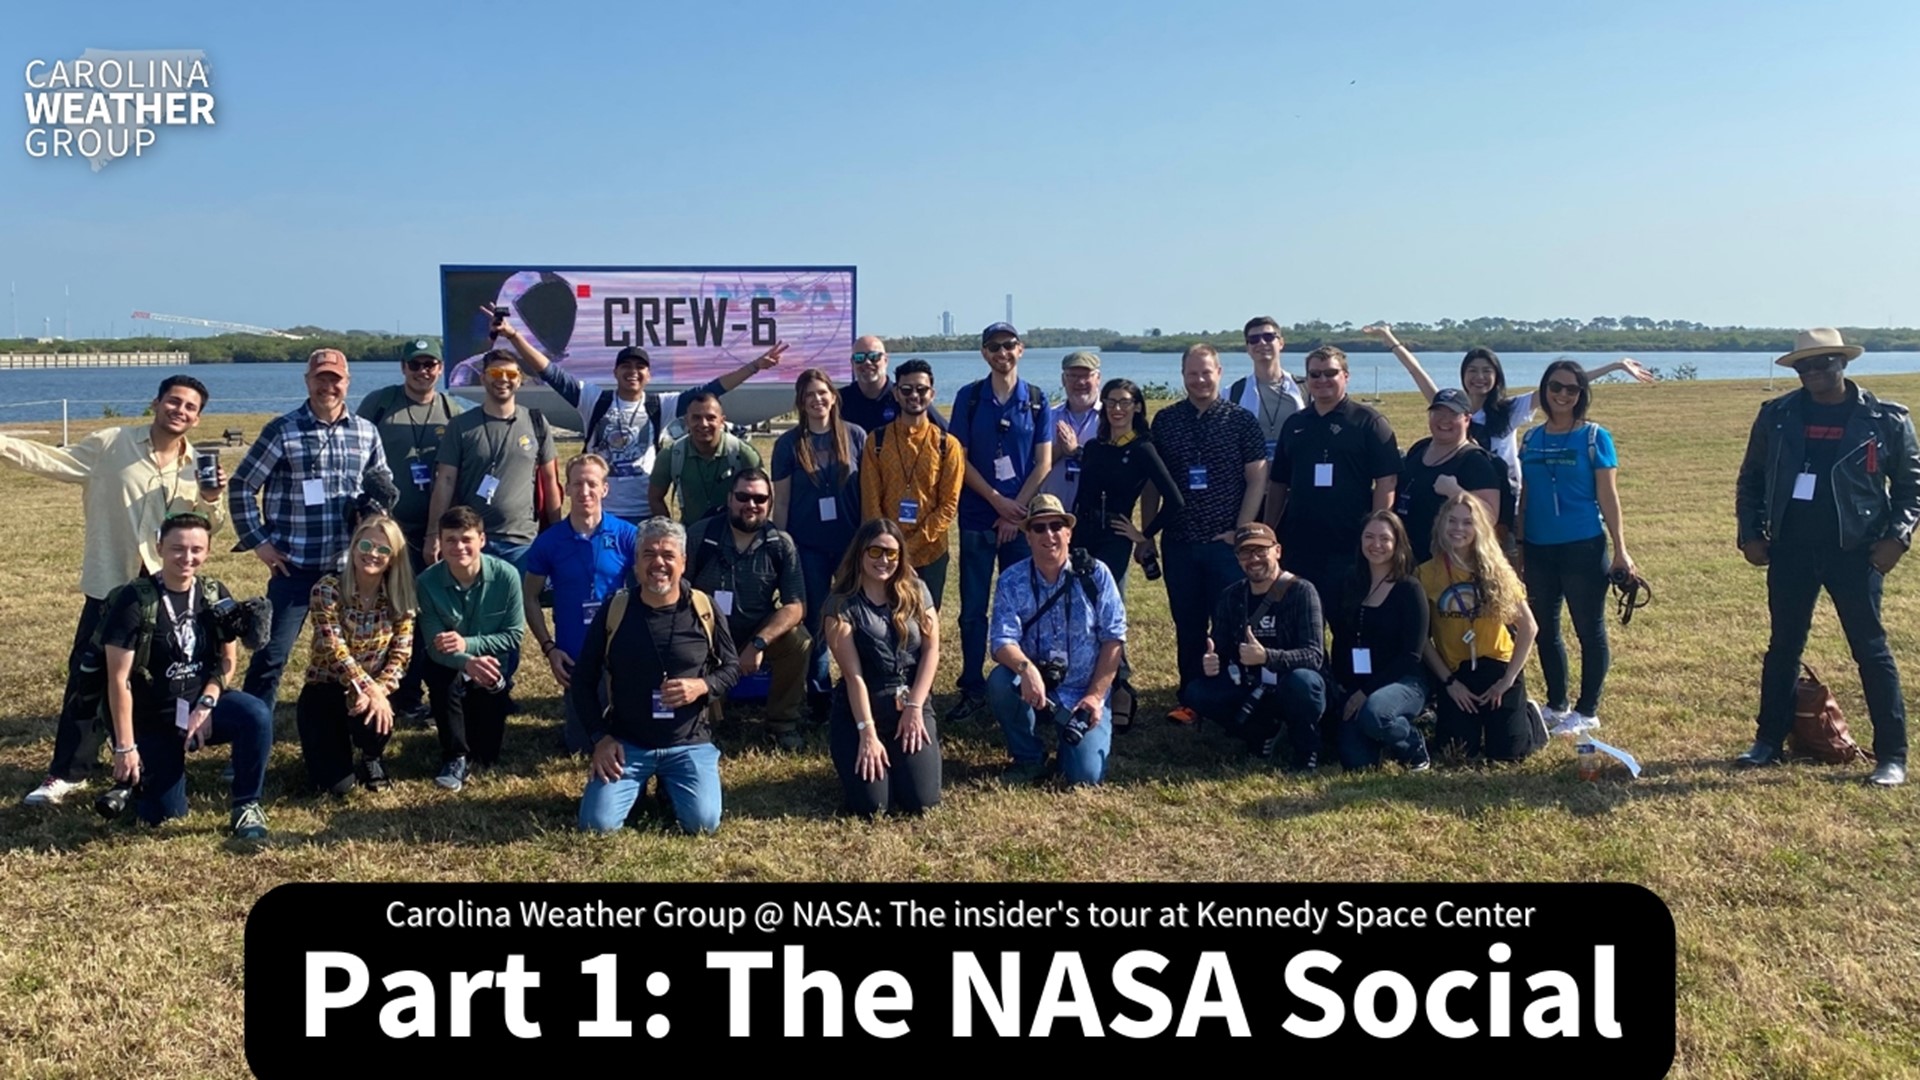 The Carolina Weather Group podcast is invited to participant in the NASA Crew-6 Social event at Kennedy Space Center in Florida.